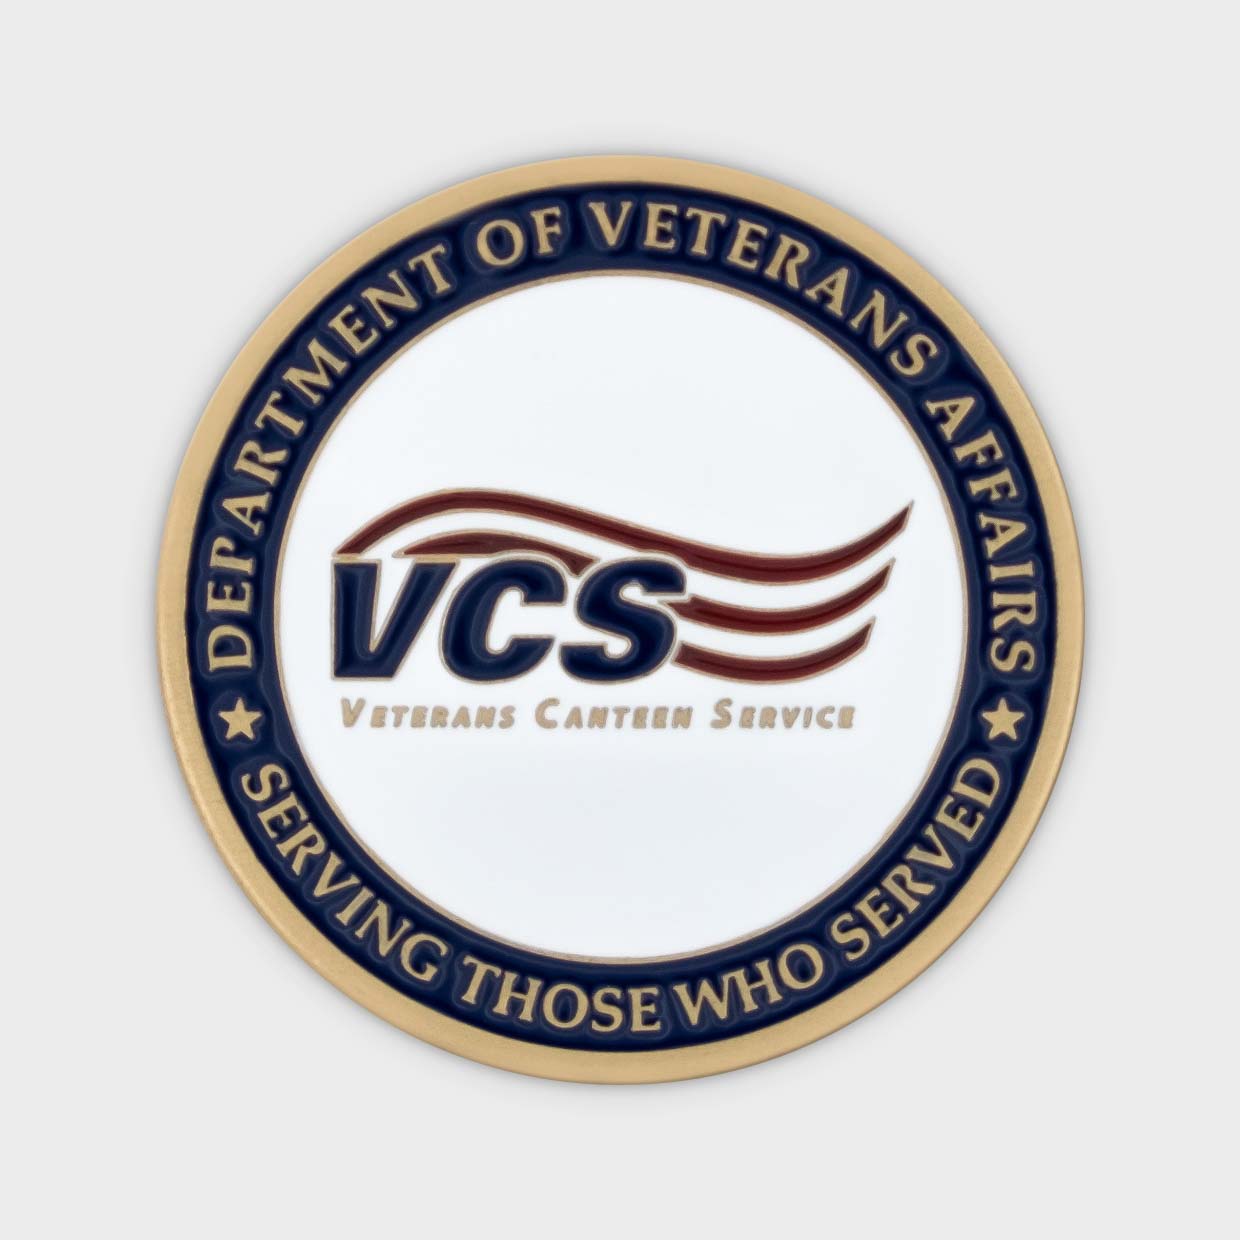 Department of Veterans Affairs Coin Obverse